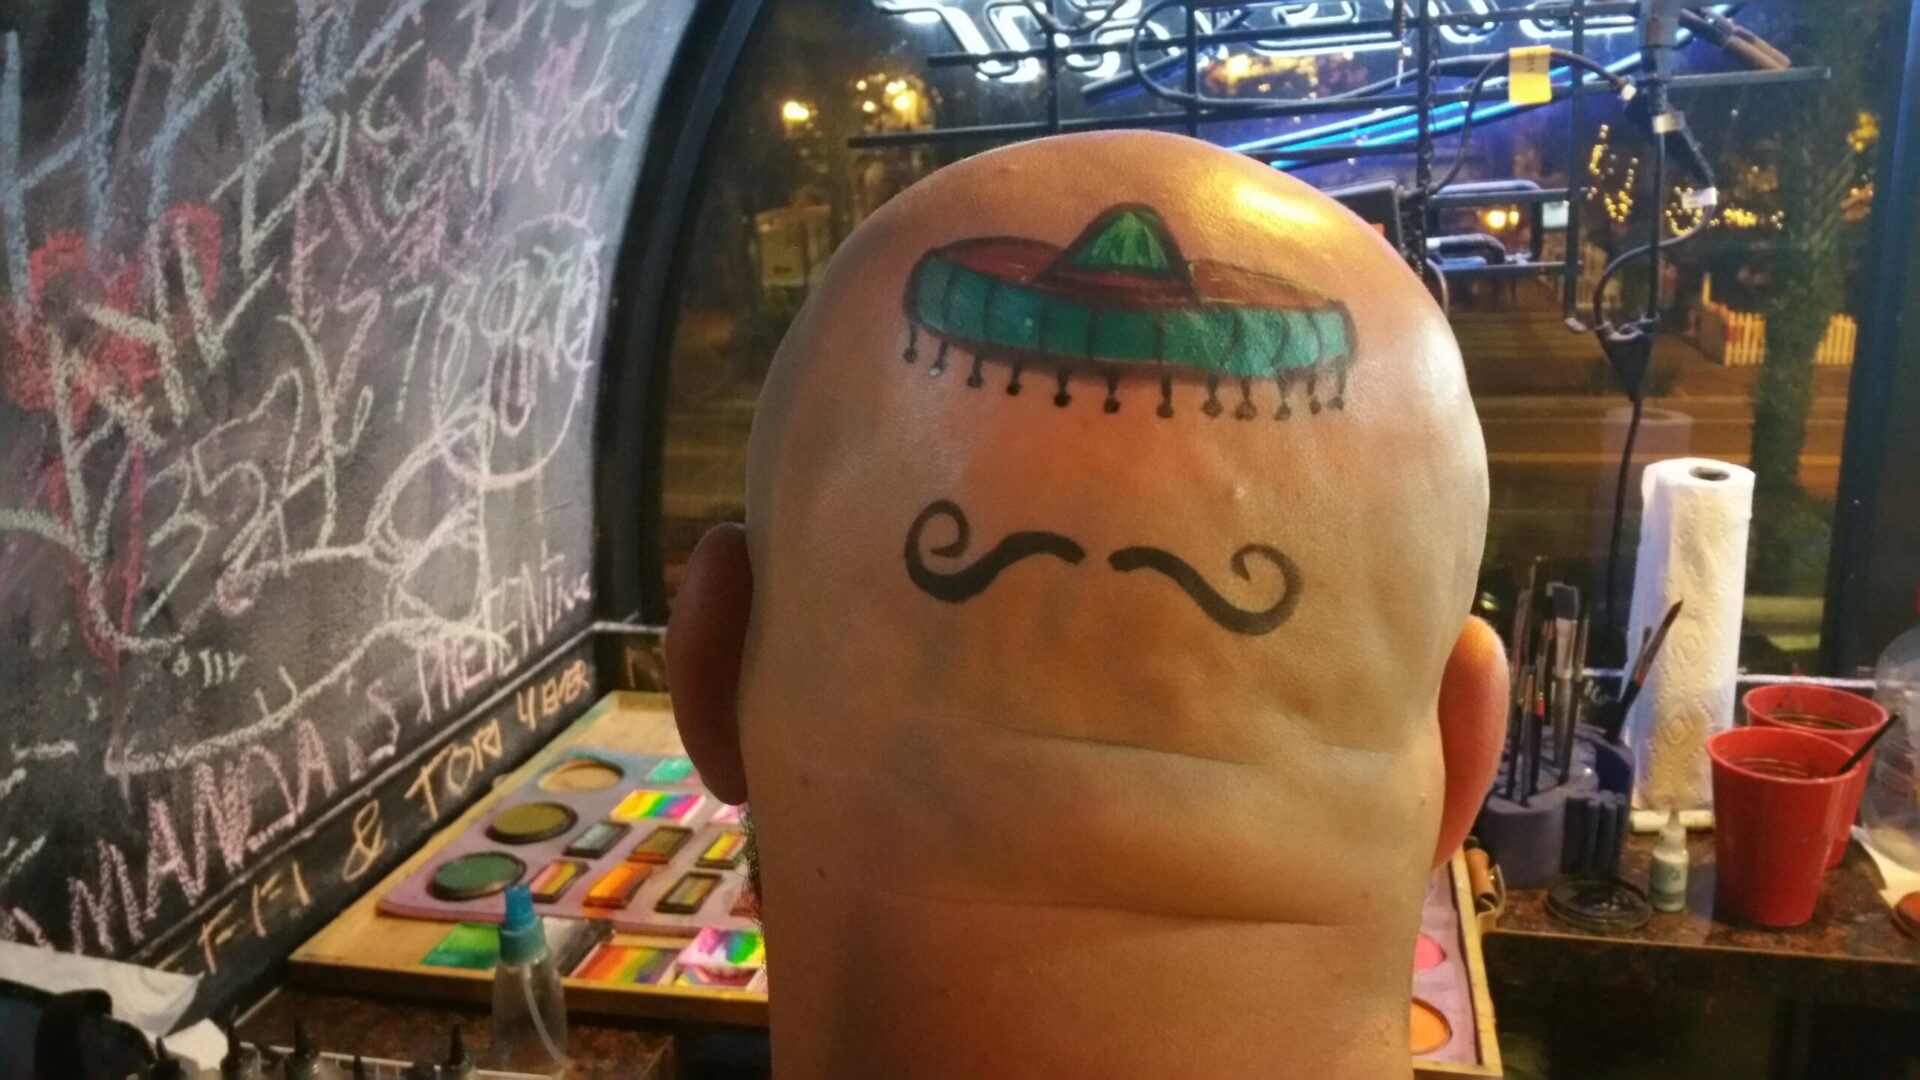 A person with a mustache and a hat on their head.